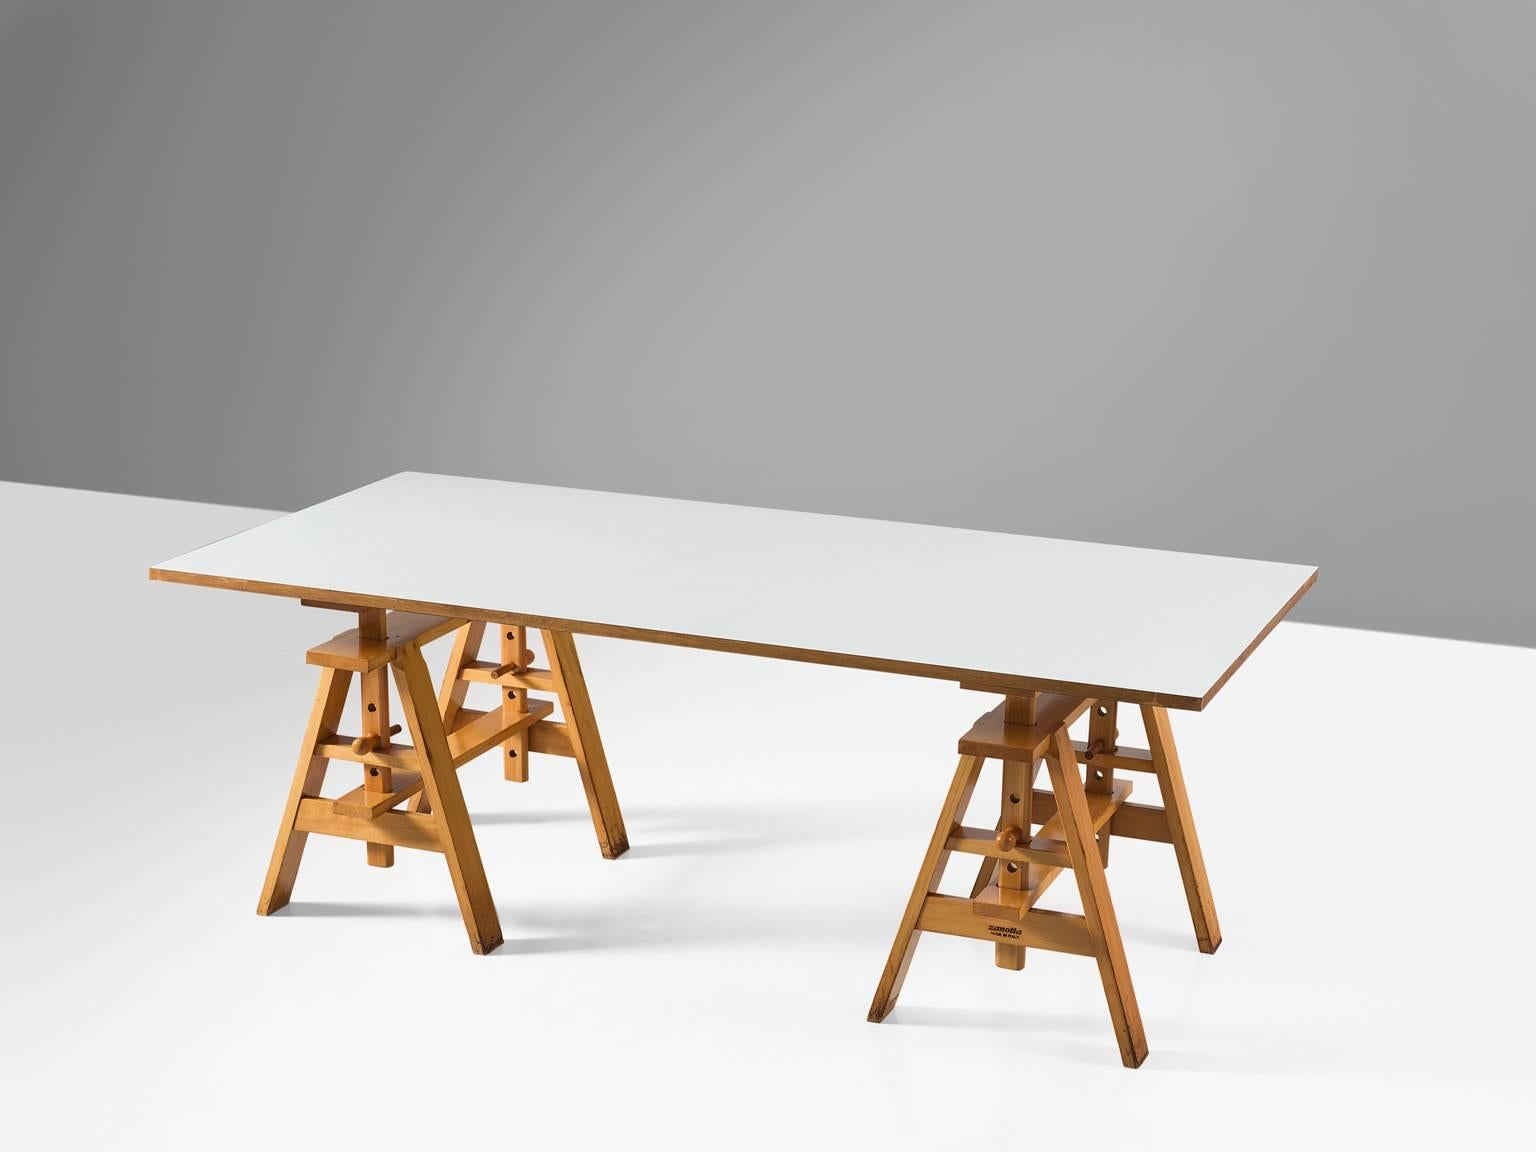 Achille Castiglioni for Zanotta, 'Leonardo' table, beech, particle Italy, design 1868, production 1980s.

This 'Leonardo' table is made and with wood trestles with a thick particleboard top coated with white plastic laminate. The table is part of